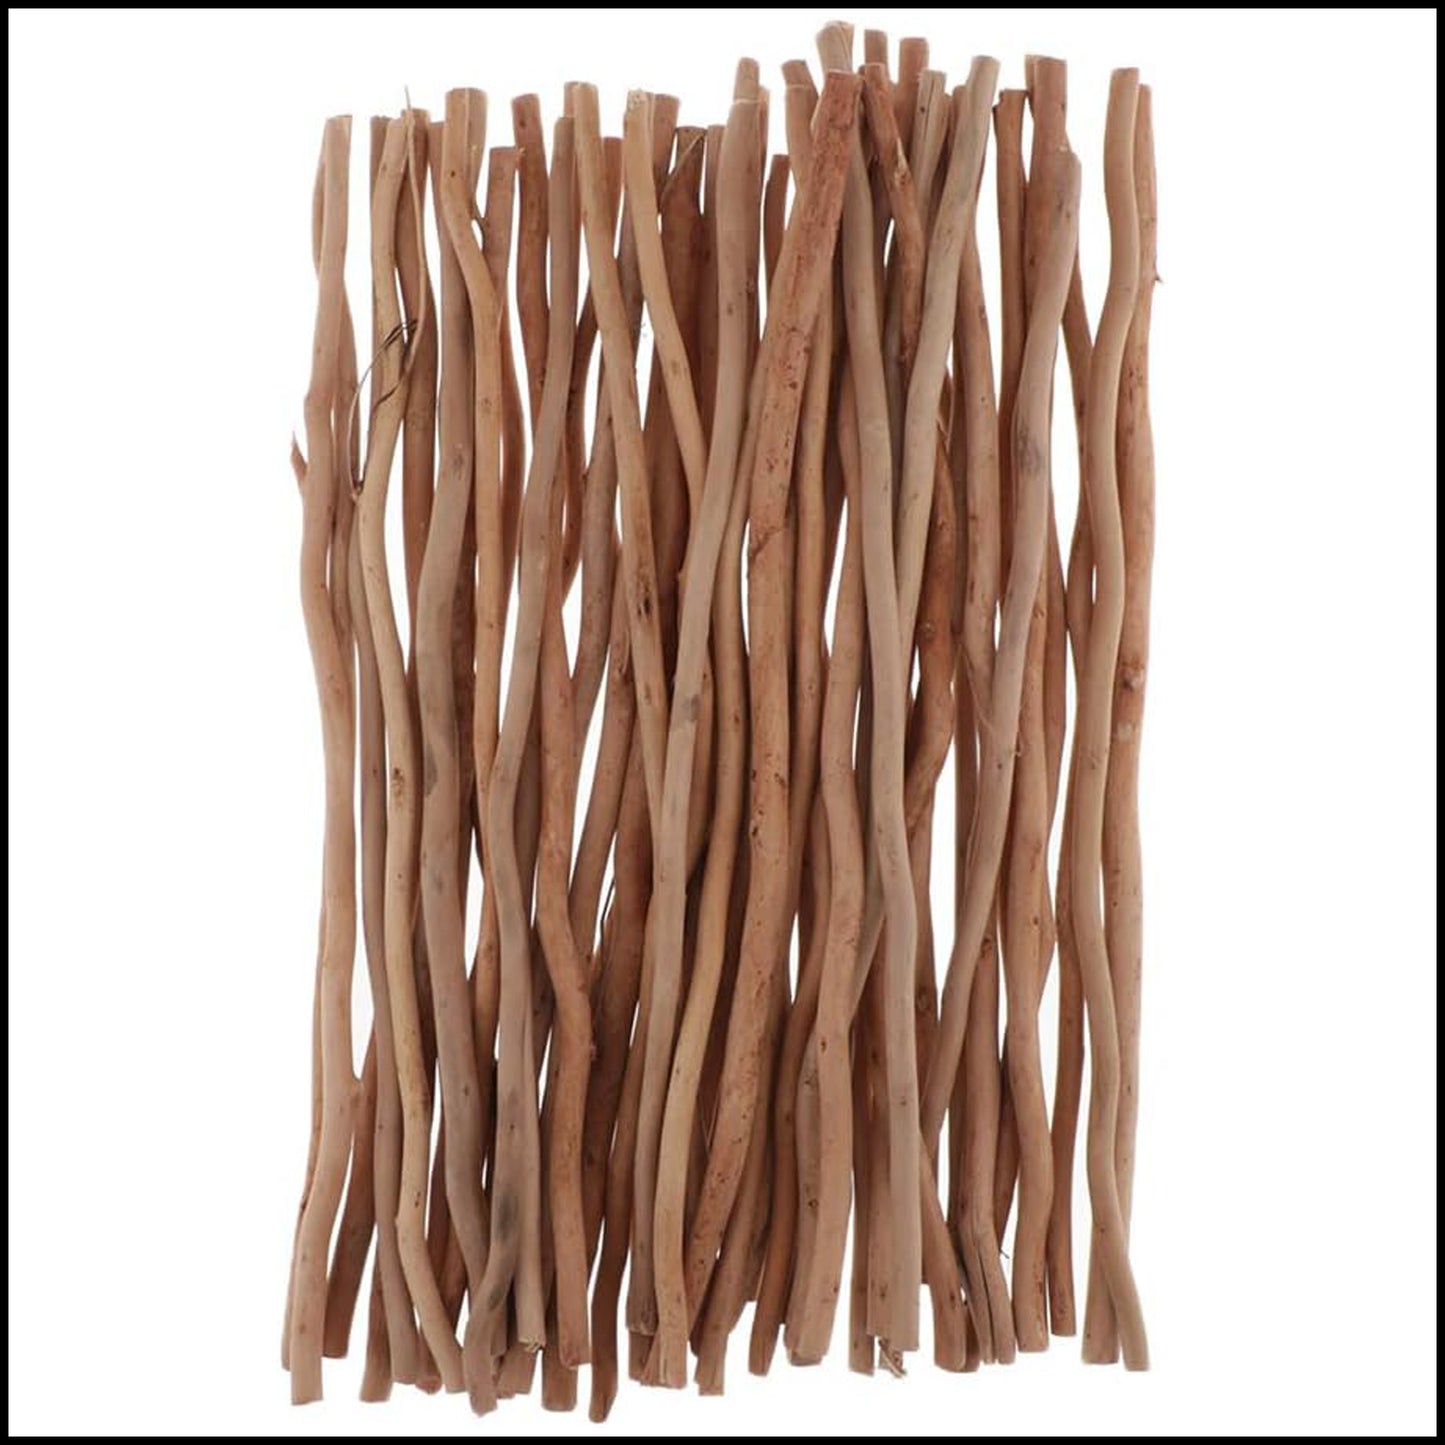 Accessory - Driftwood Branches - Quantity 5